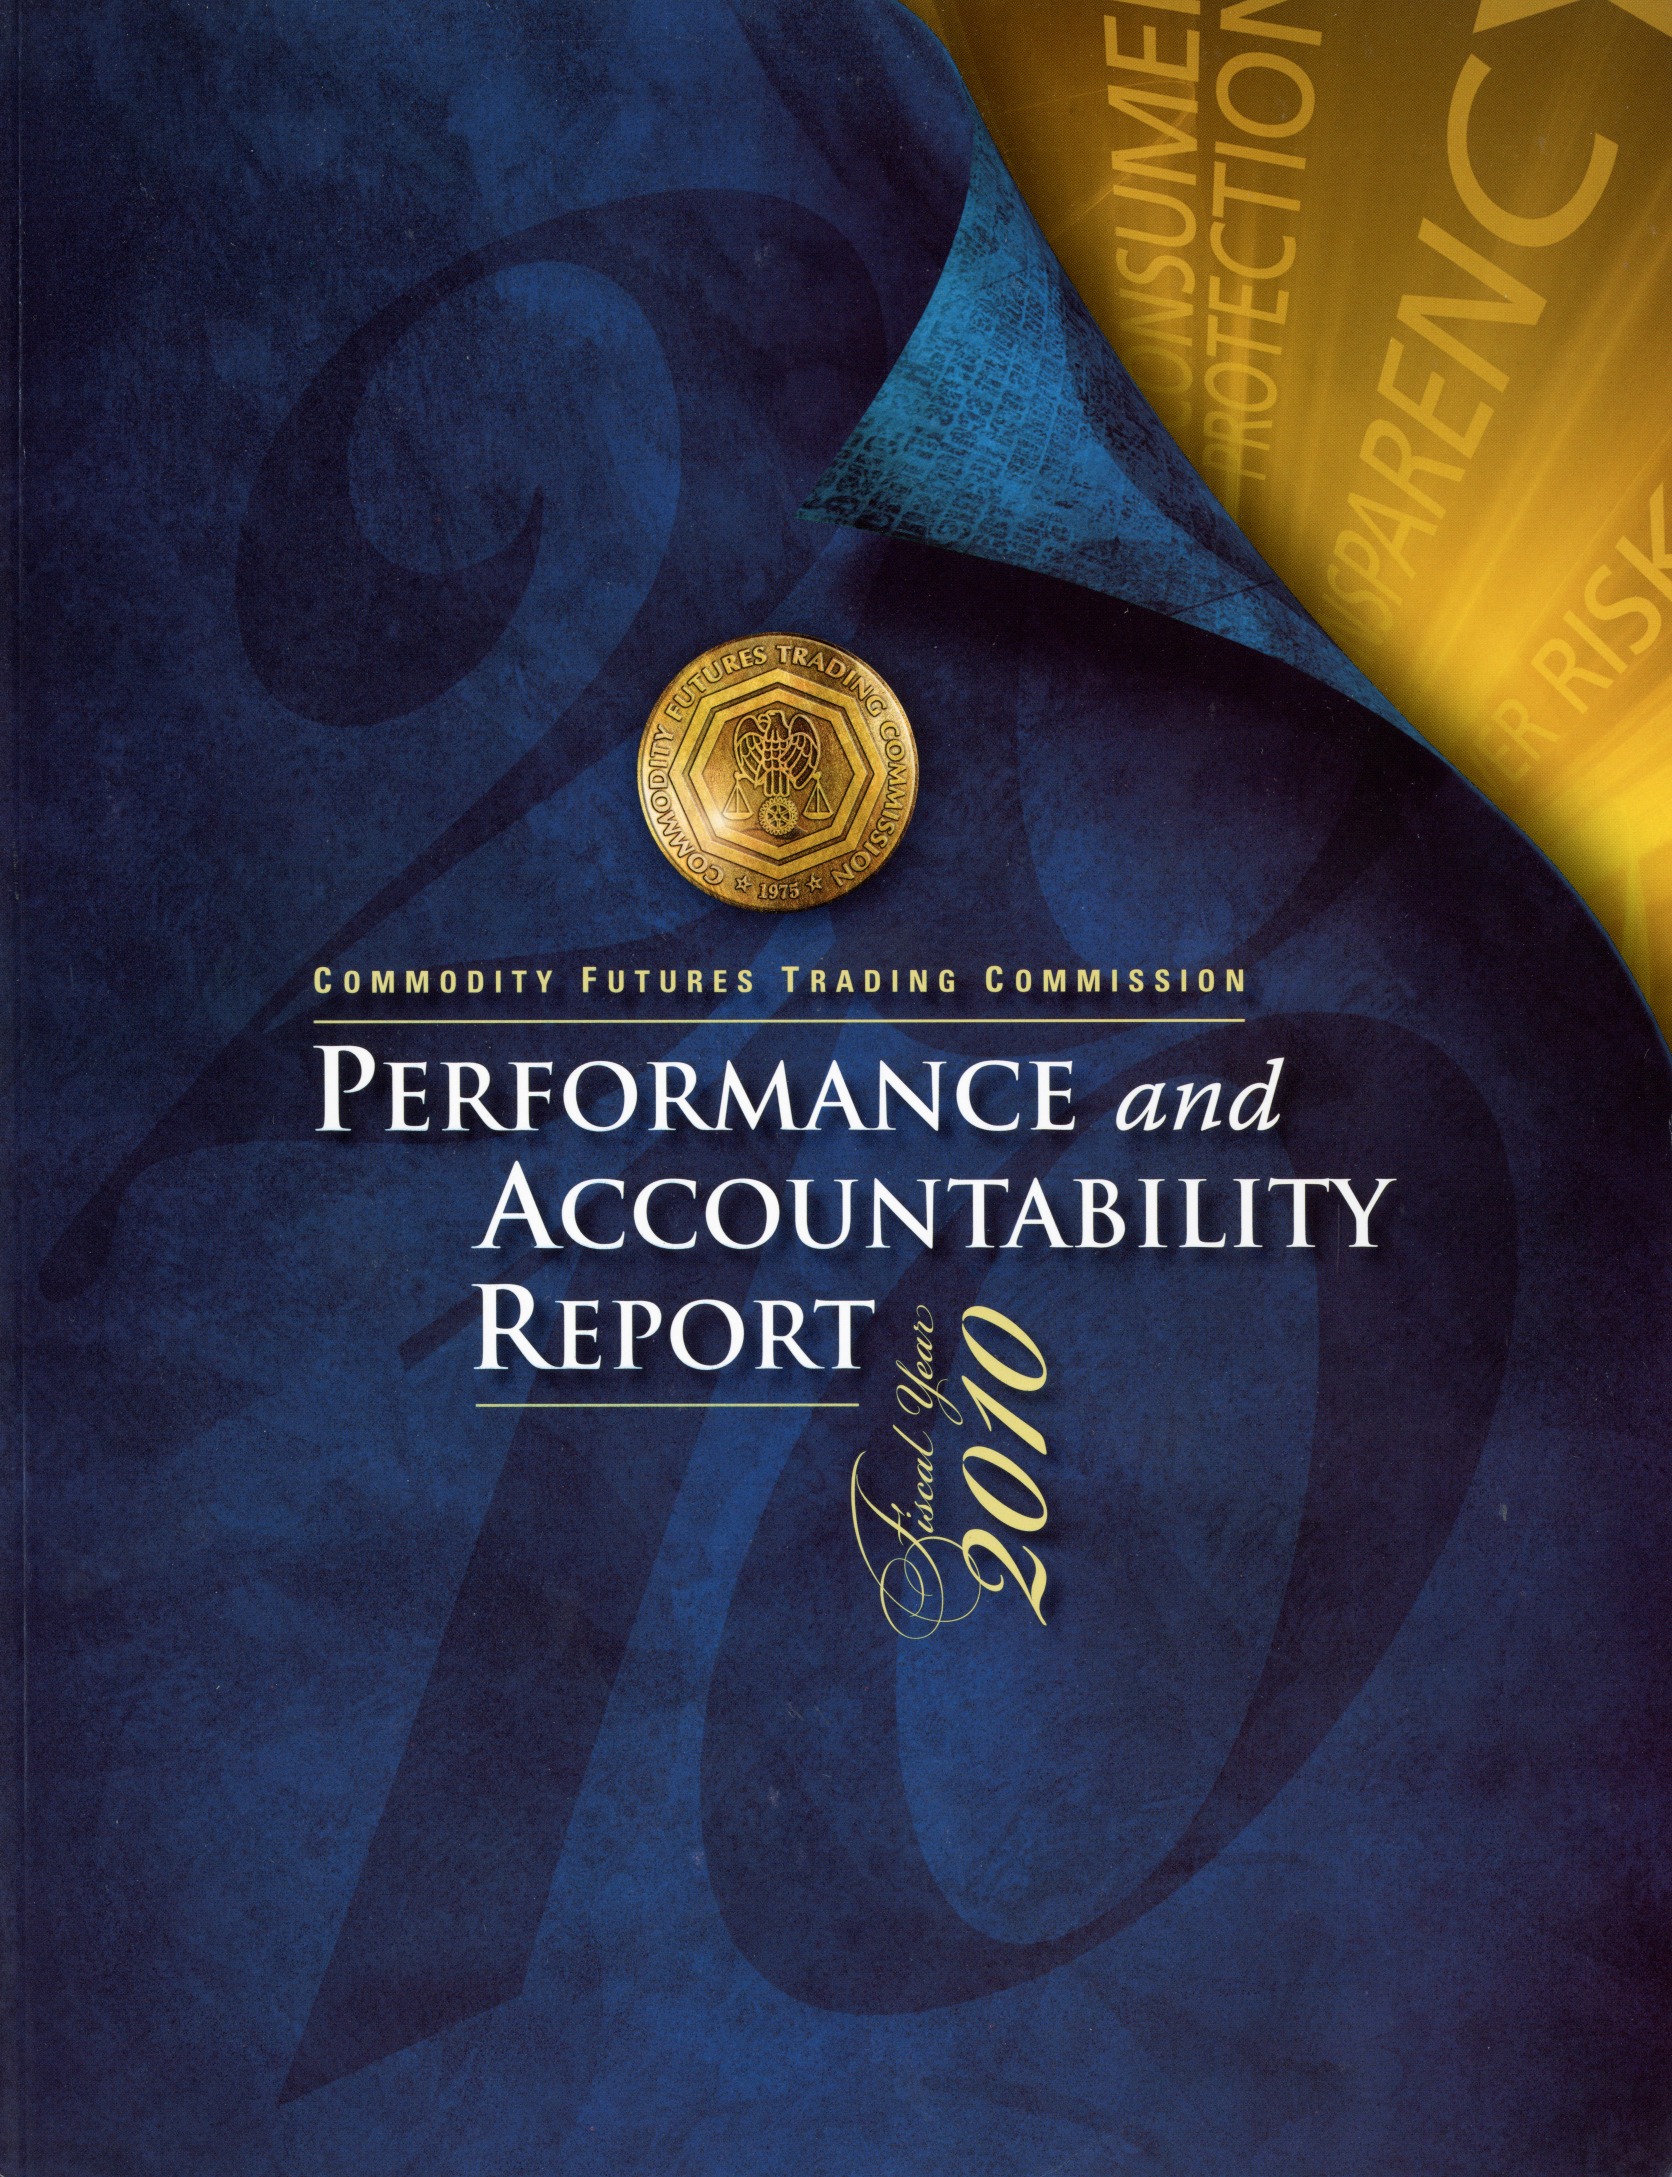 LACP 2010 Vision Awards Annual Report Competition | Commodity Futures